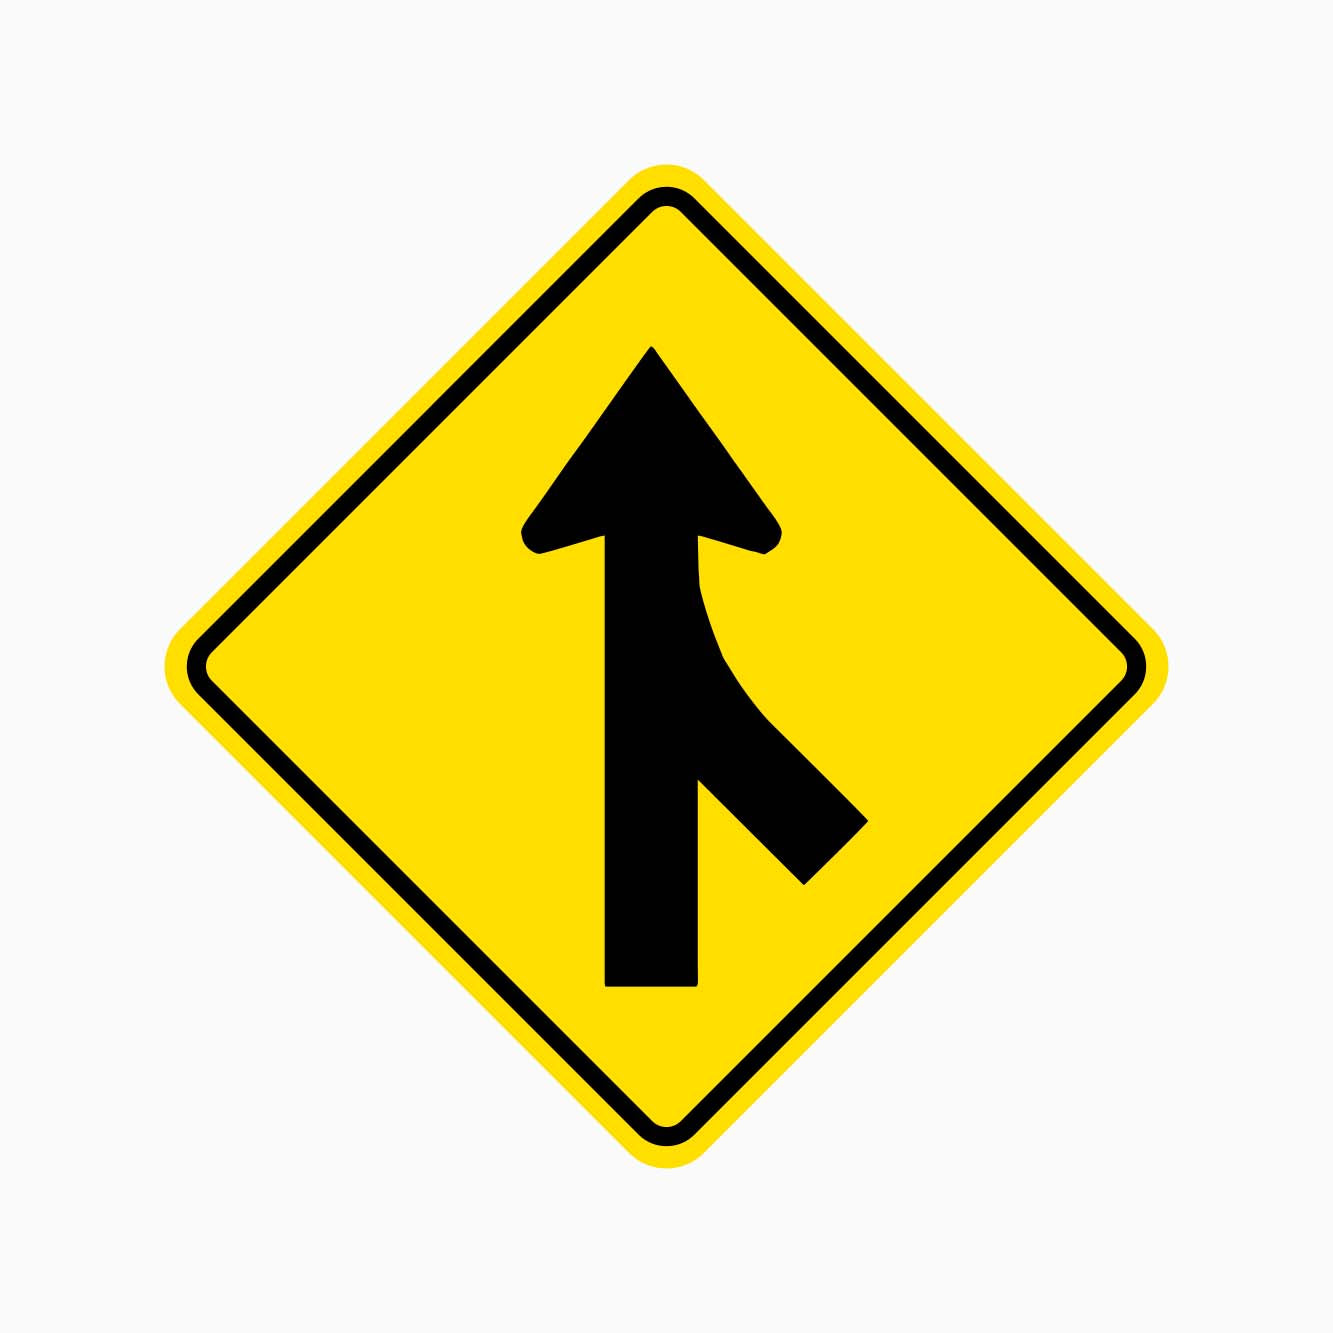 MERGING TRAFFIC RIGHT SIGN W5-34(R)